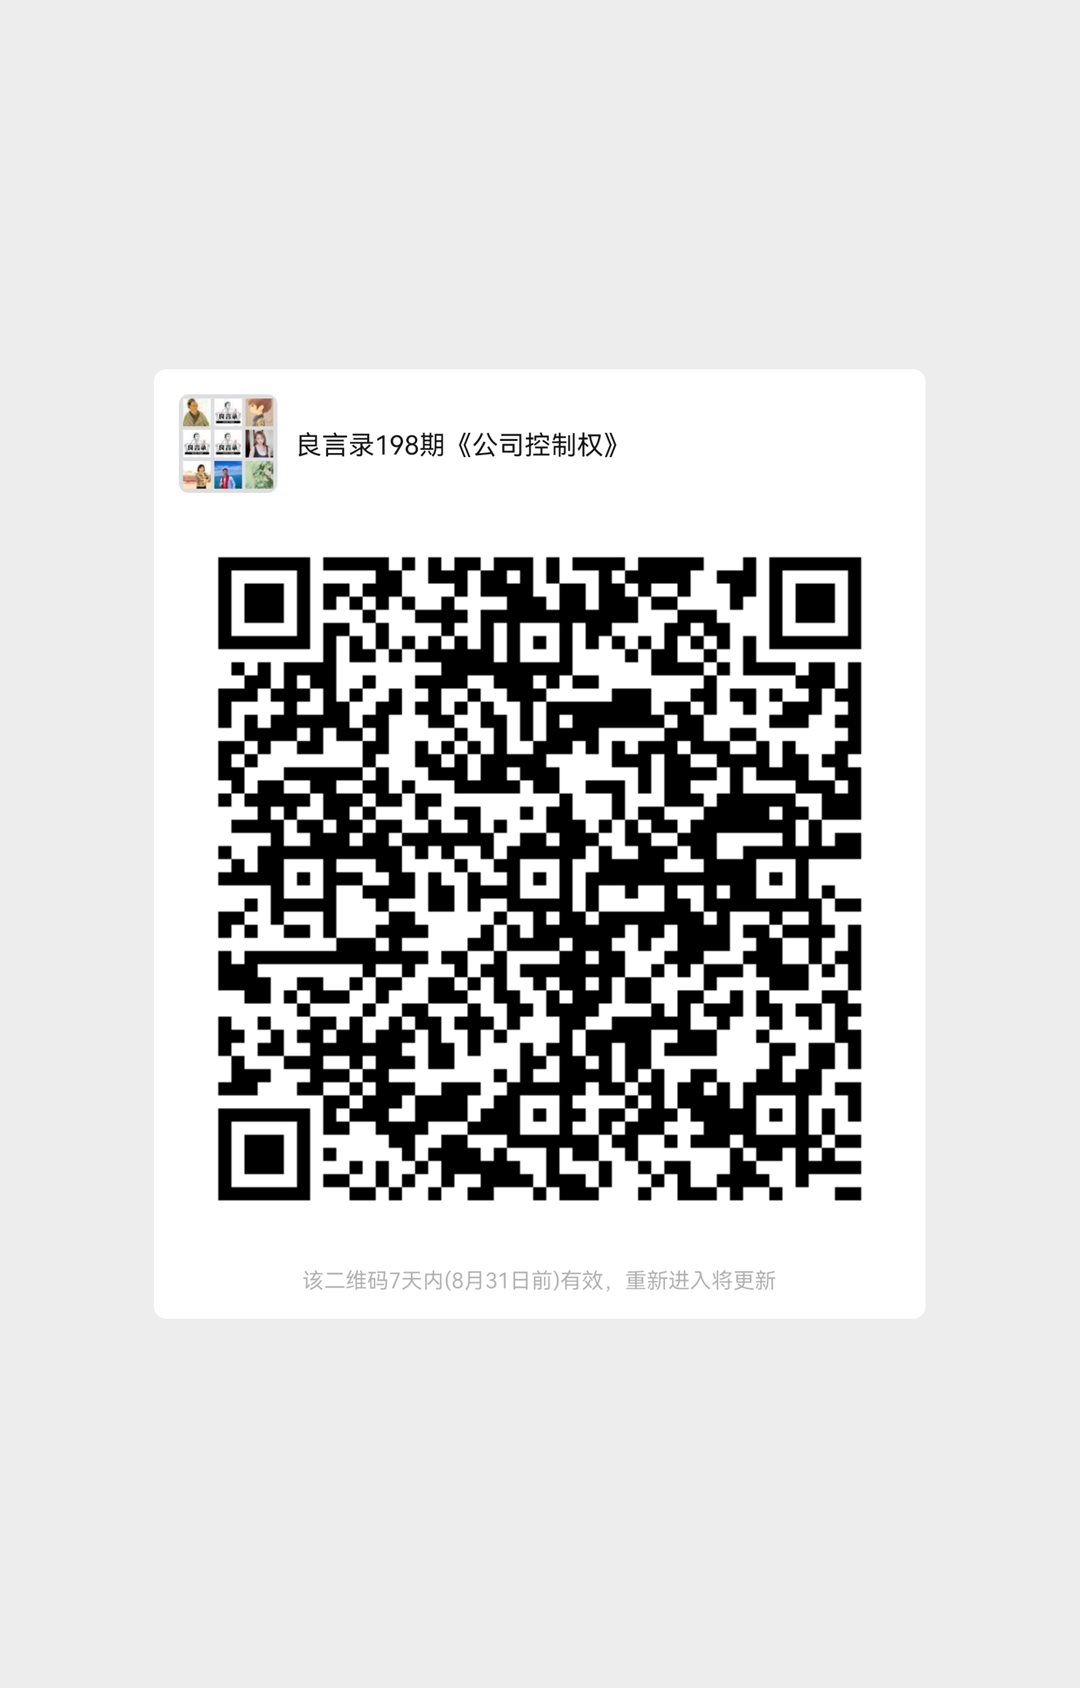 mmqrcode1629771287963.png